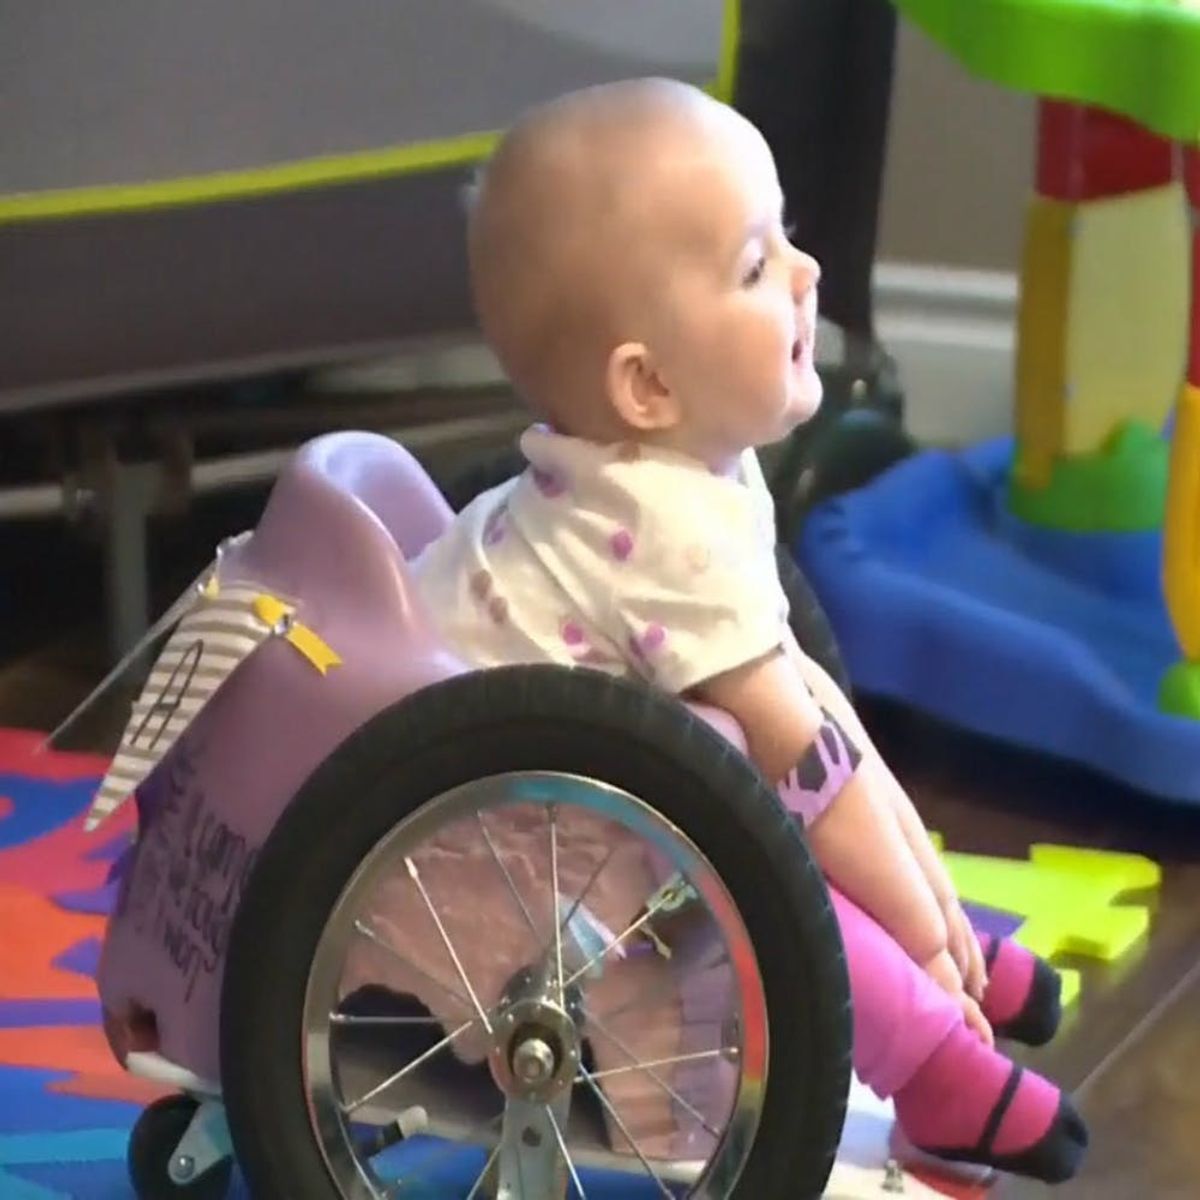 This Mom Crafted a Homemade Wheelchair for Her Baby Using Pinterest